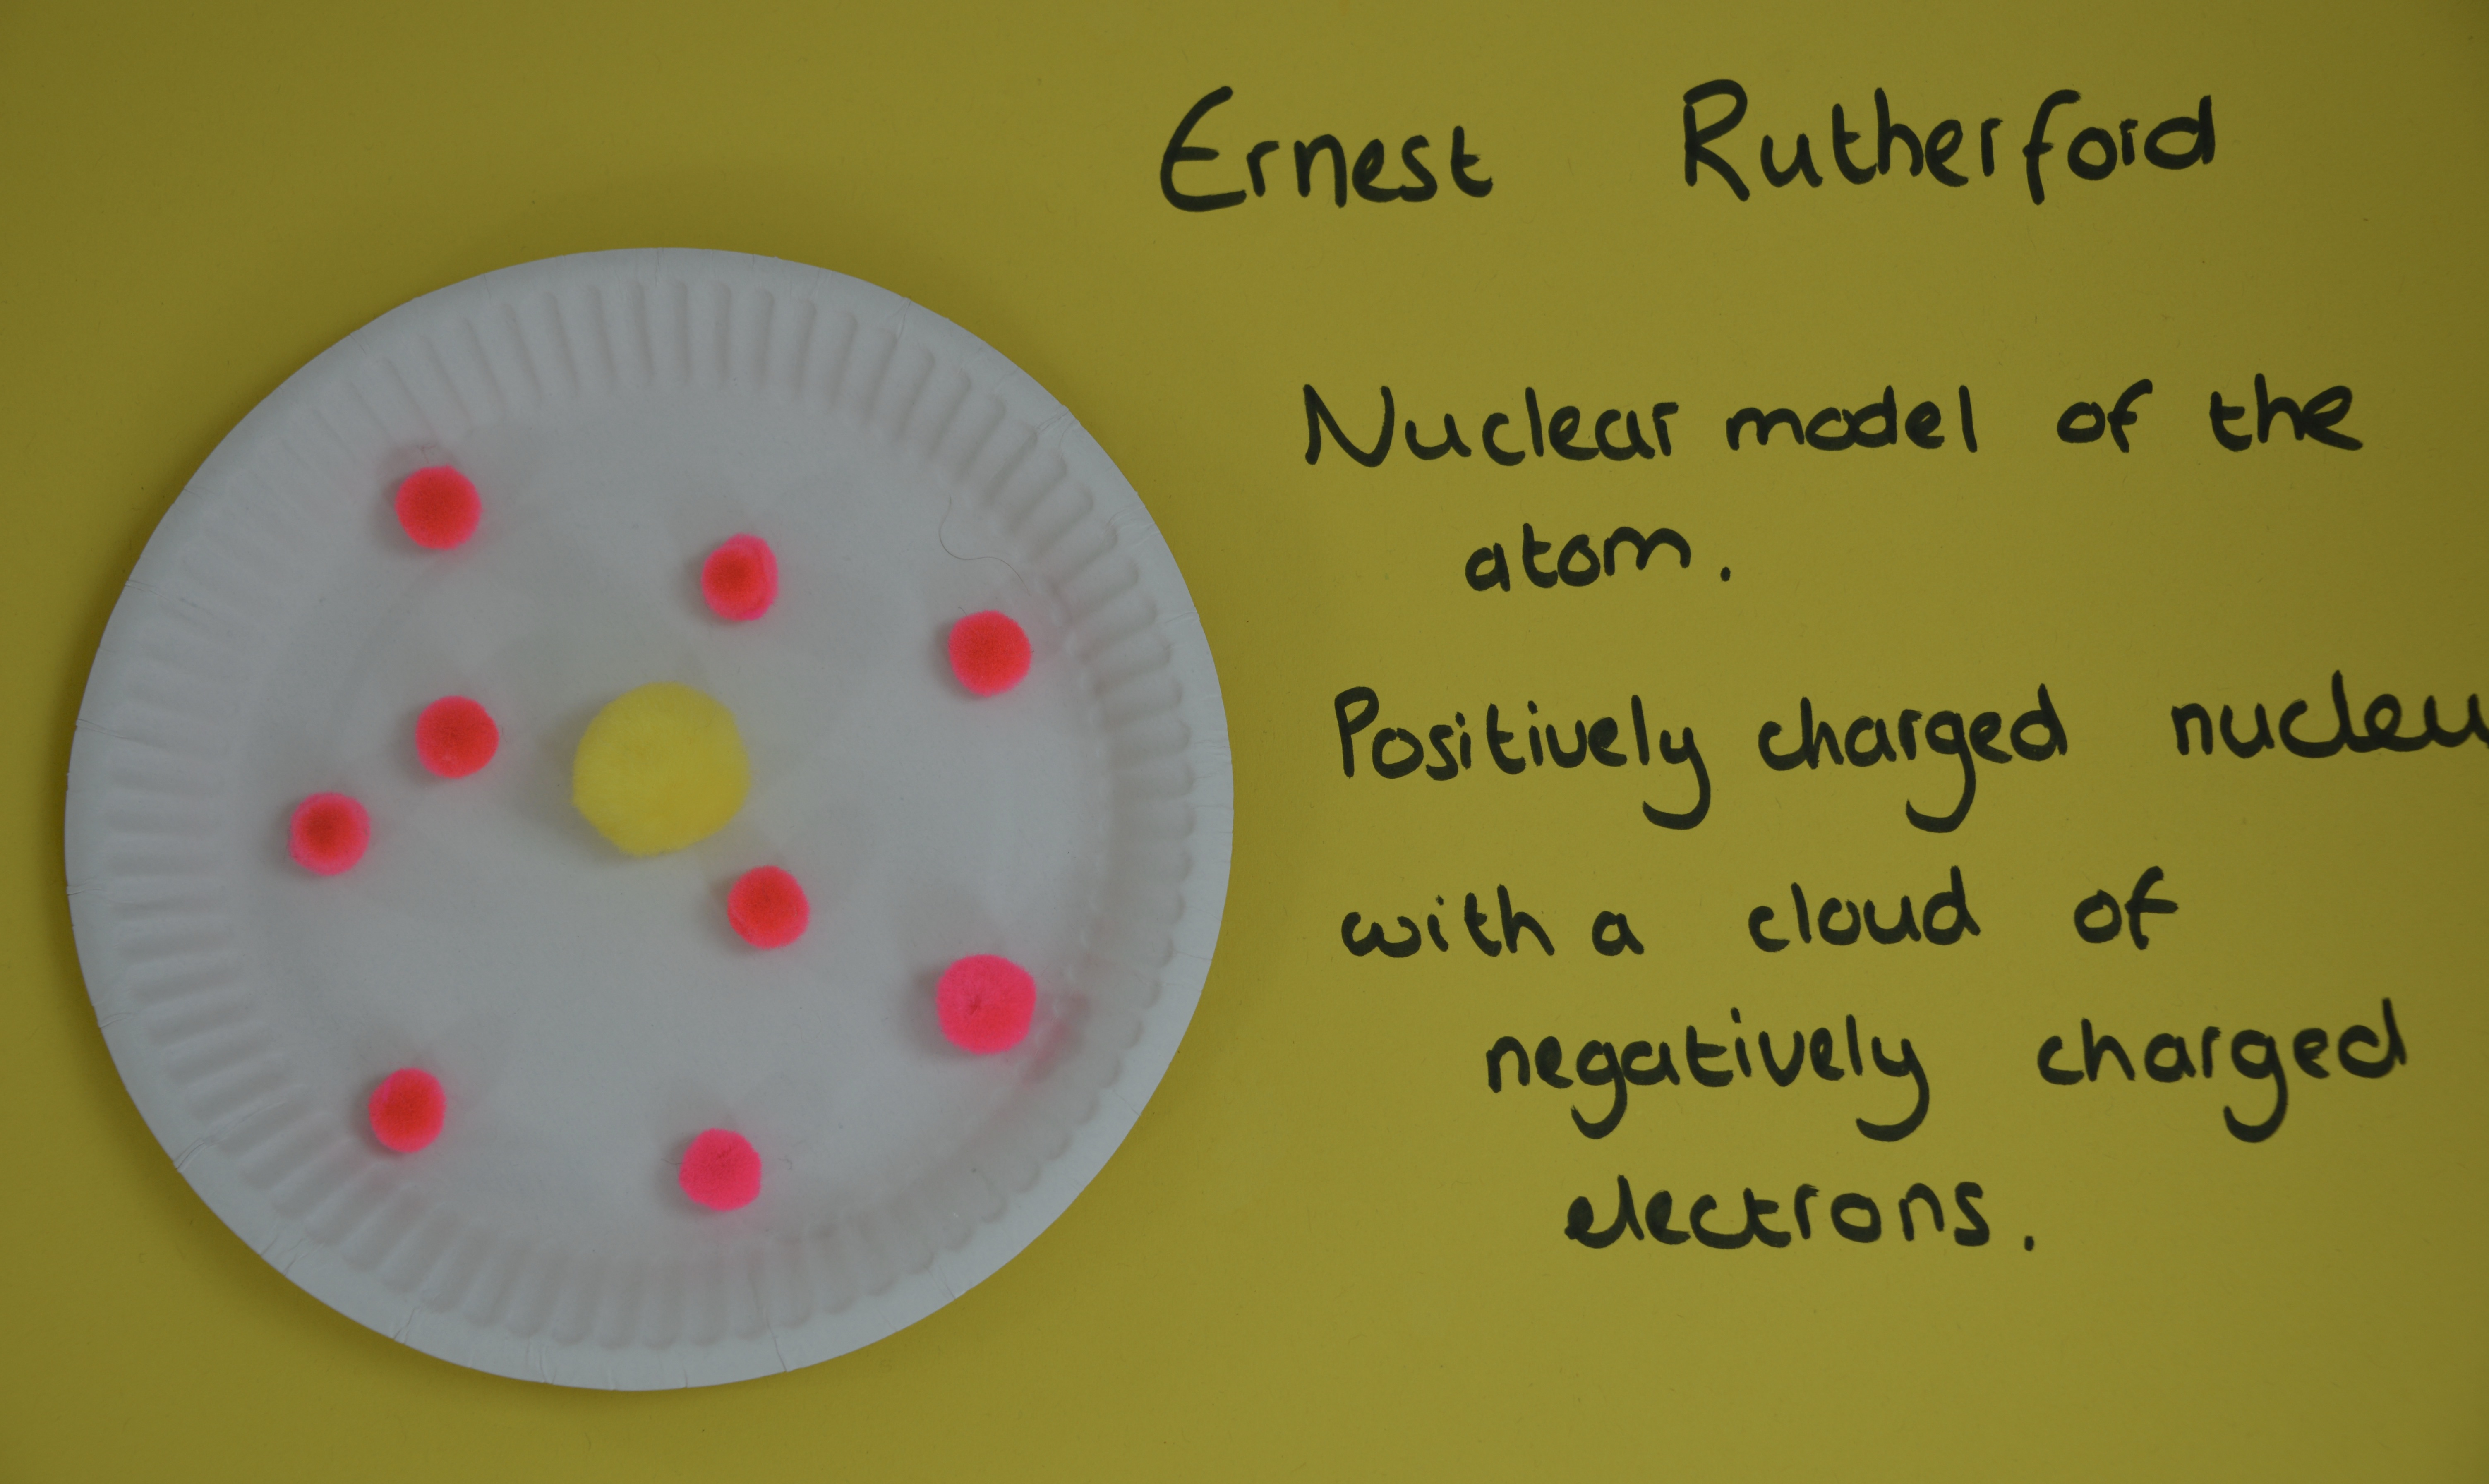 Ernest Rutherford's model of the atom